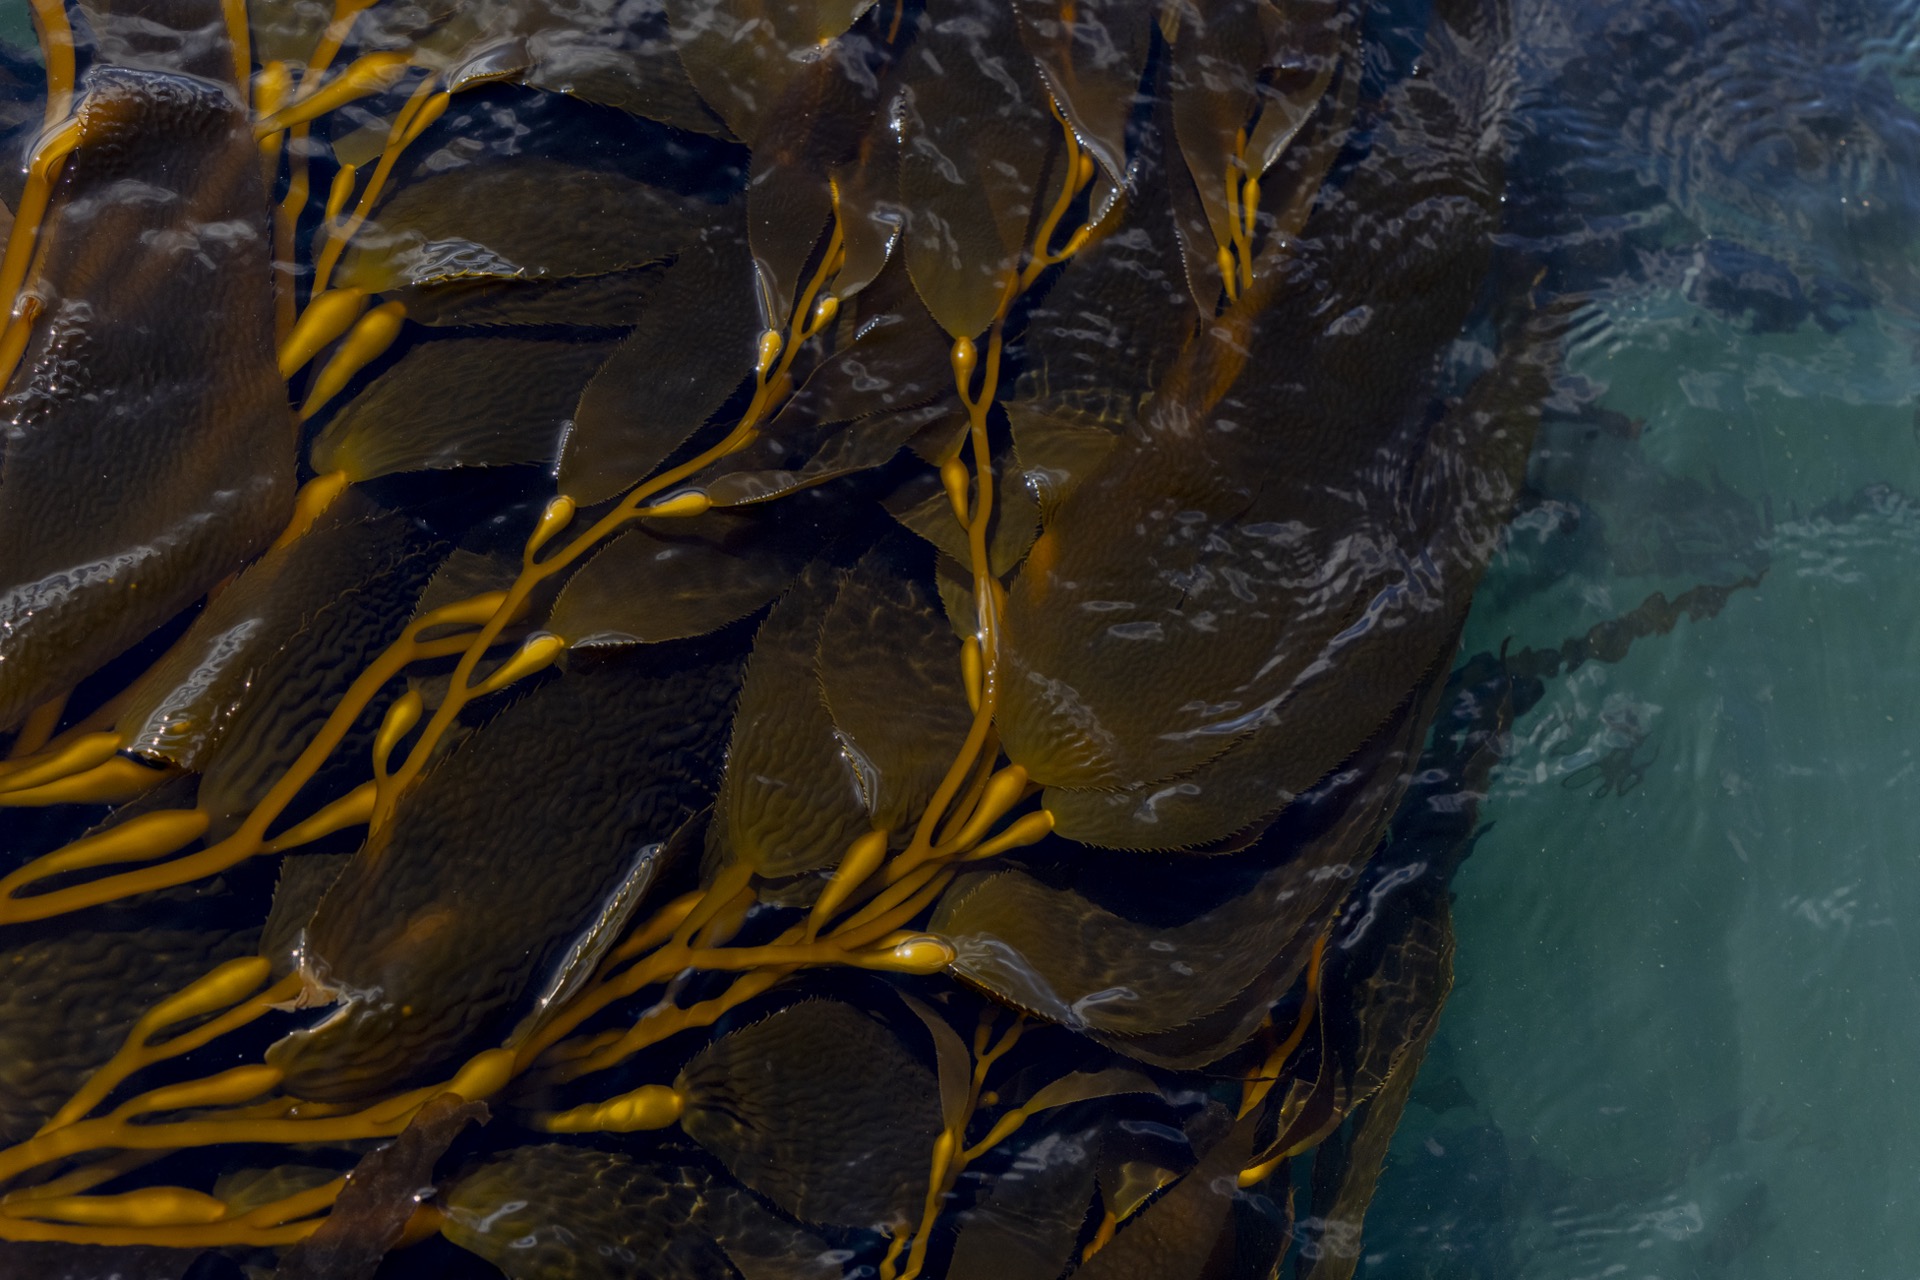 Kelp Blue has established about 5 hectares of a cultivated kelp pilot farm in Sheerwater Bay, off the coast of Lüderitz, Namibia, August 17, 2023. Adriane Ohanesian for the Bulletin of the Atomic Scientists